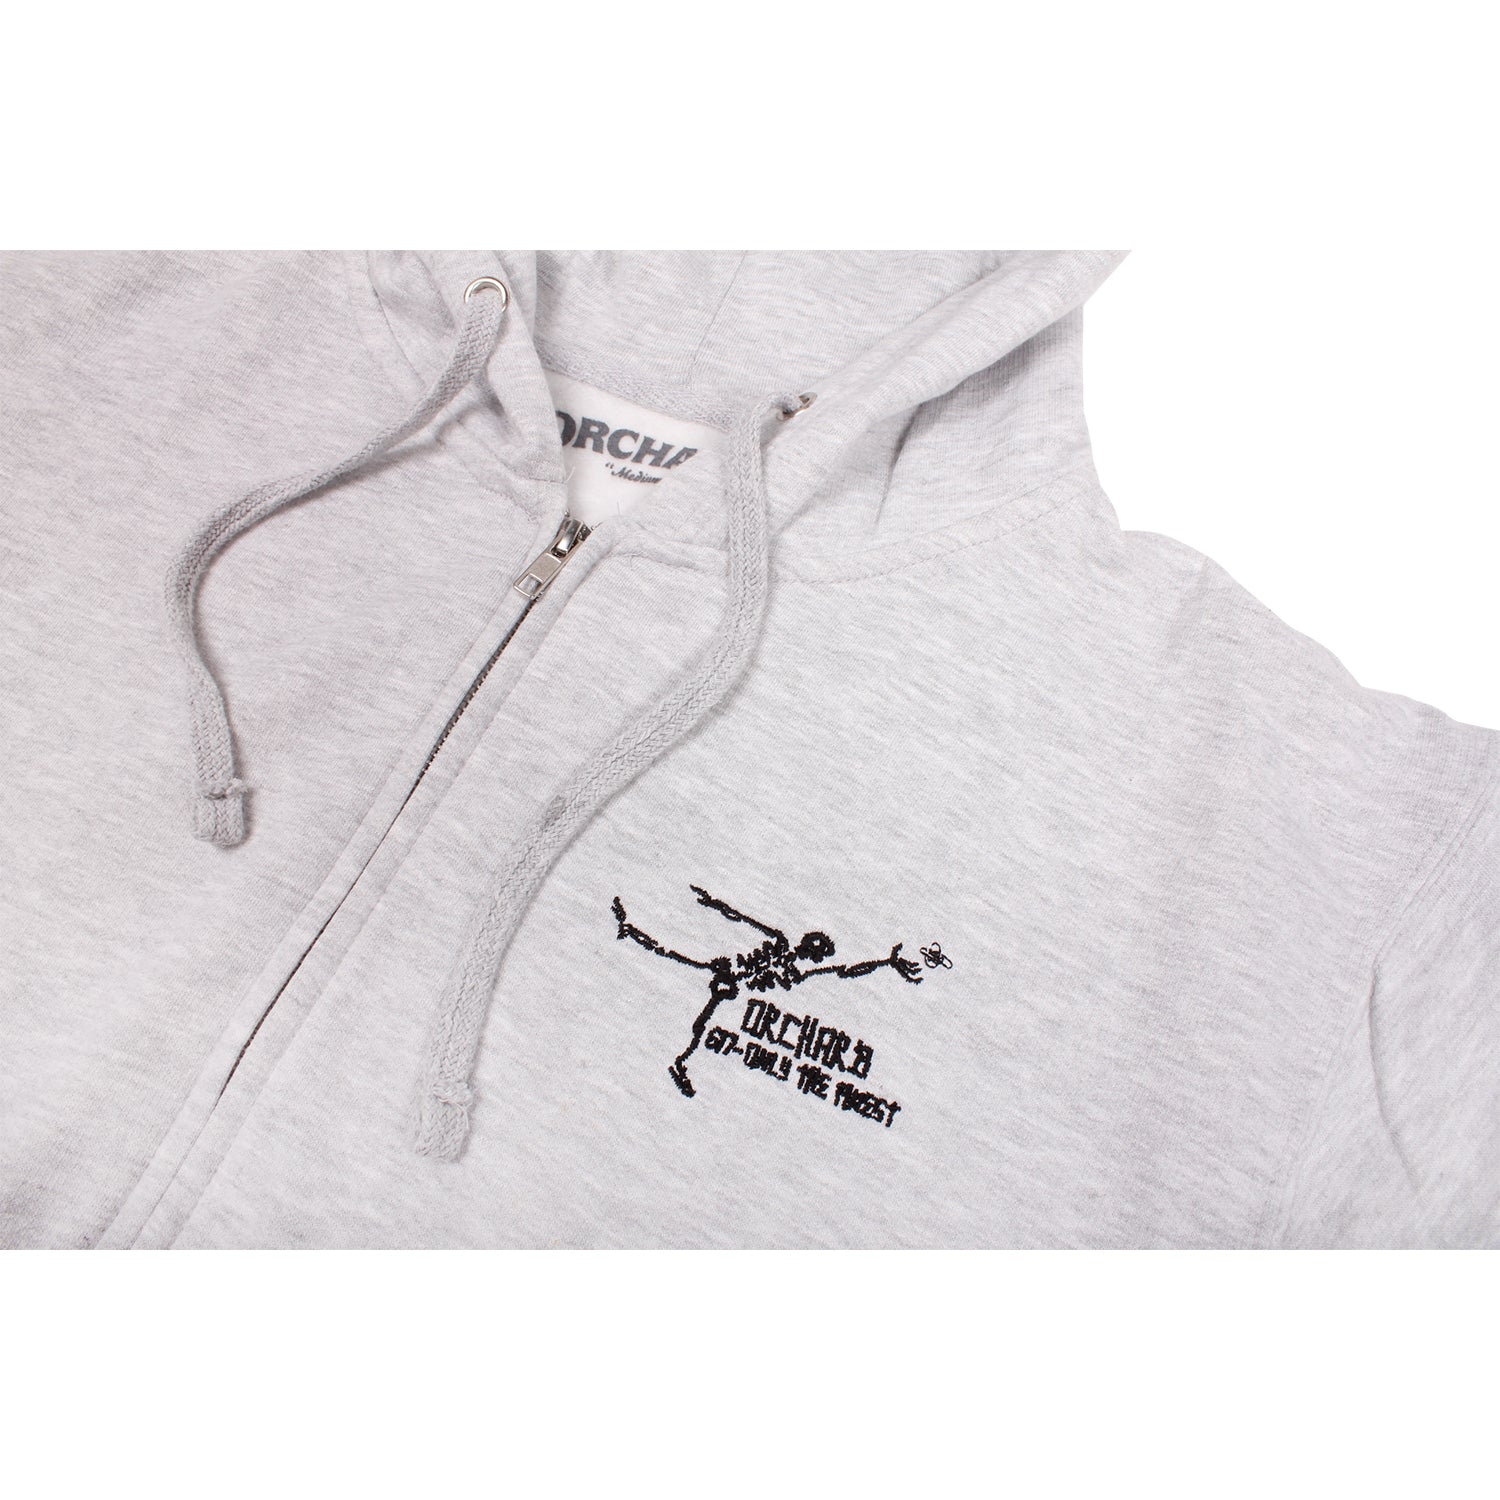 Orchard Gonz Only The Finest Zip Up Hooded Sweatshirt Ash